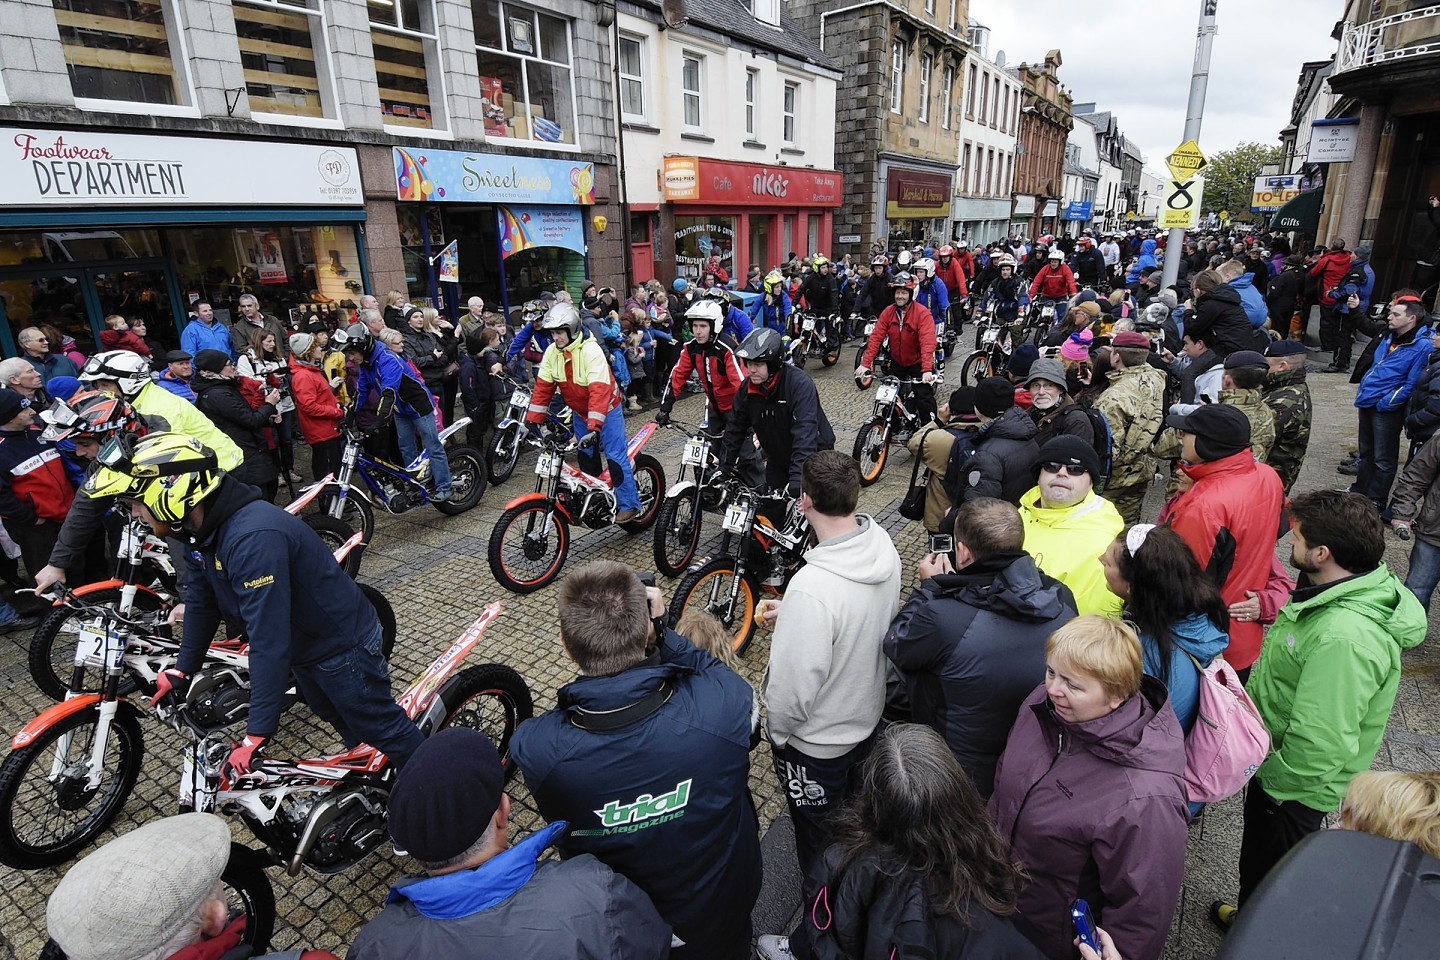 Fort William High Street was lined with Trials enthusiasts as hundreds of bikes and their riders from across the world roared past.